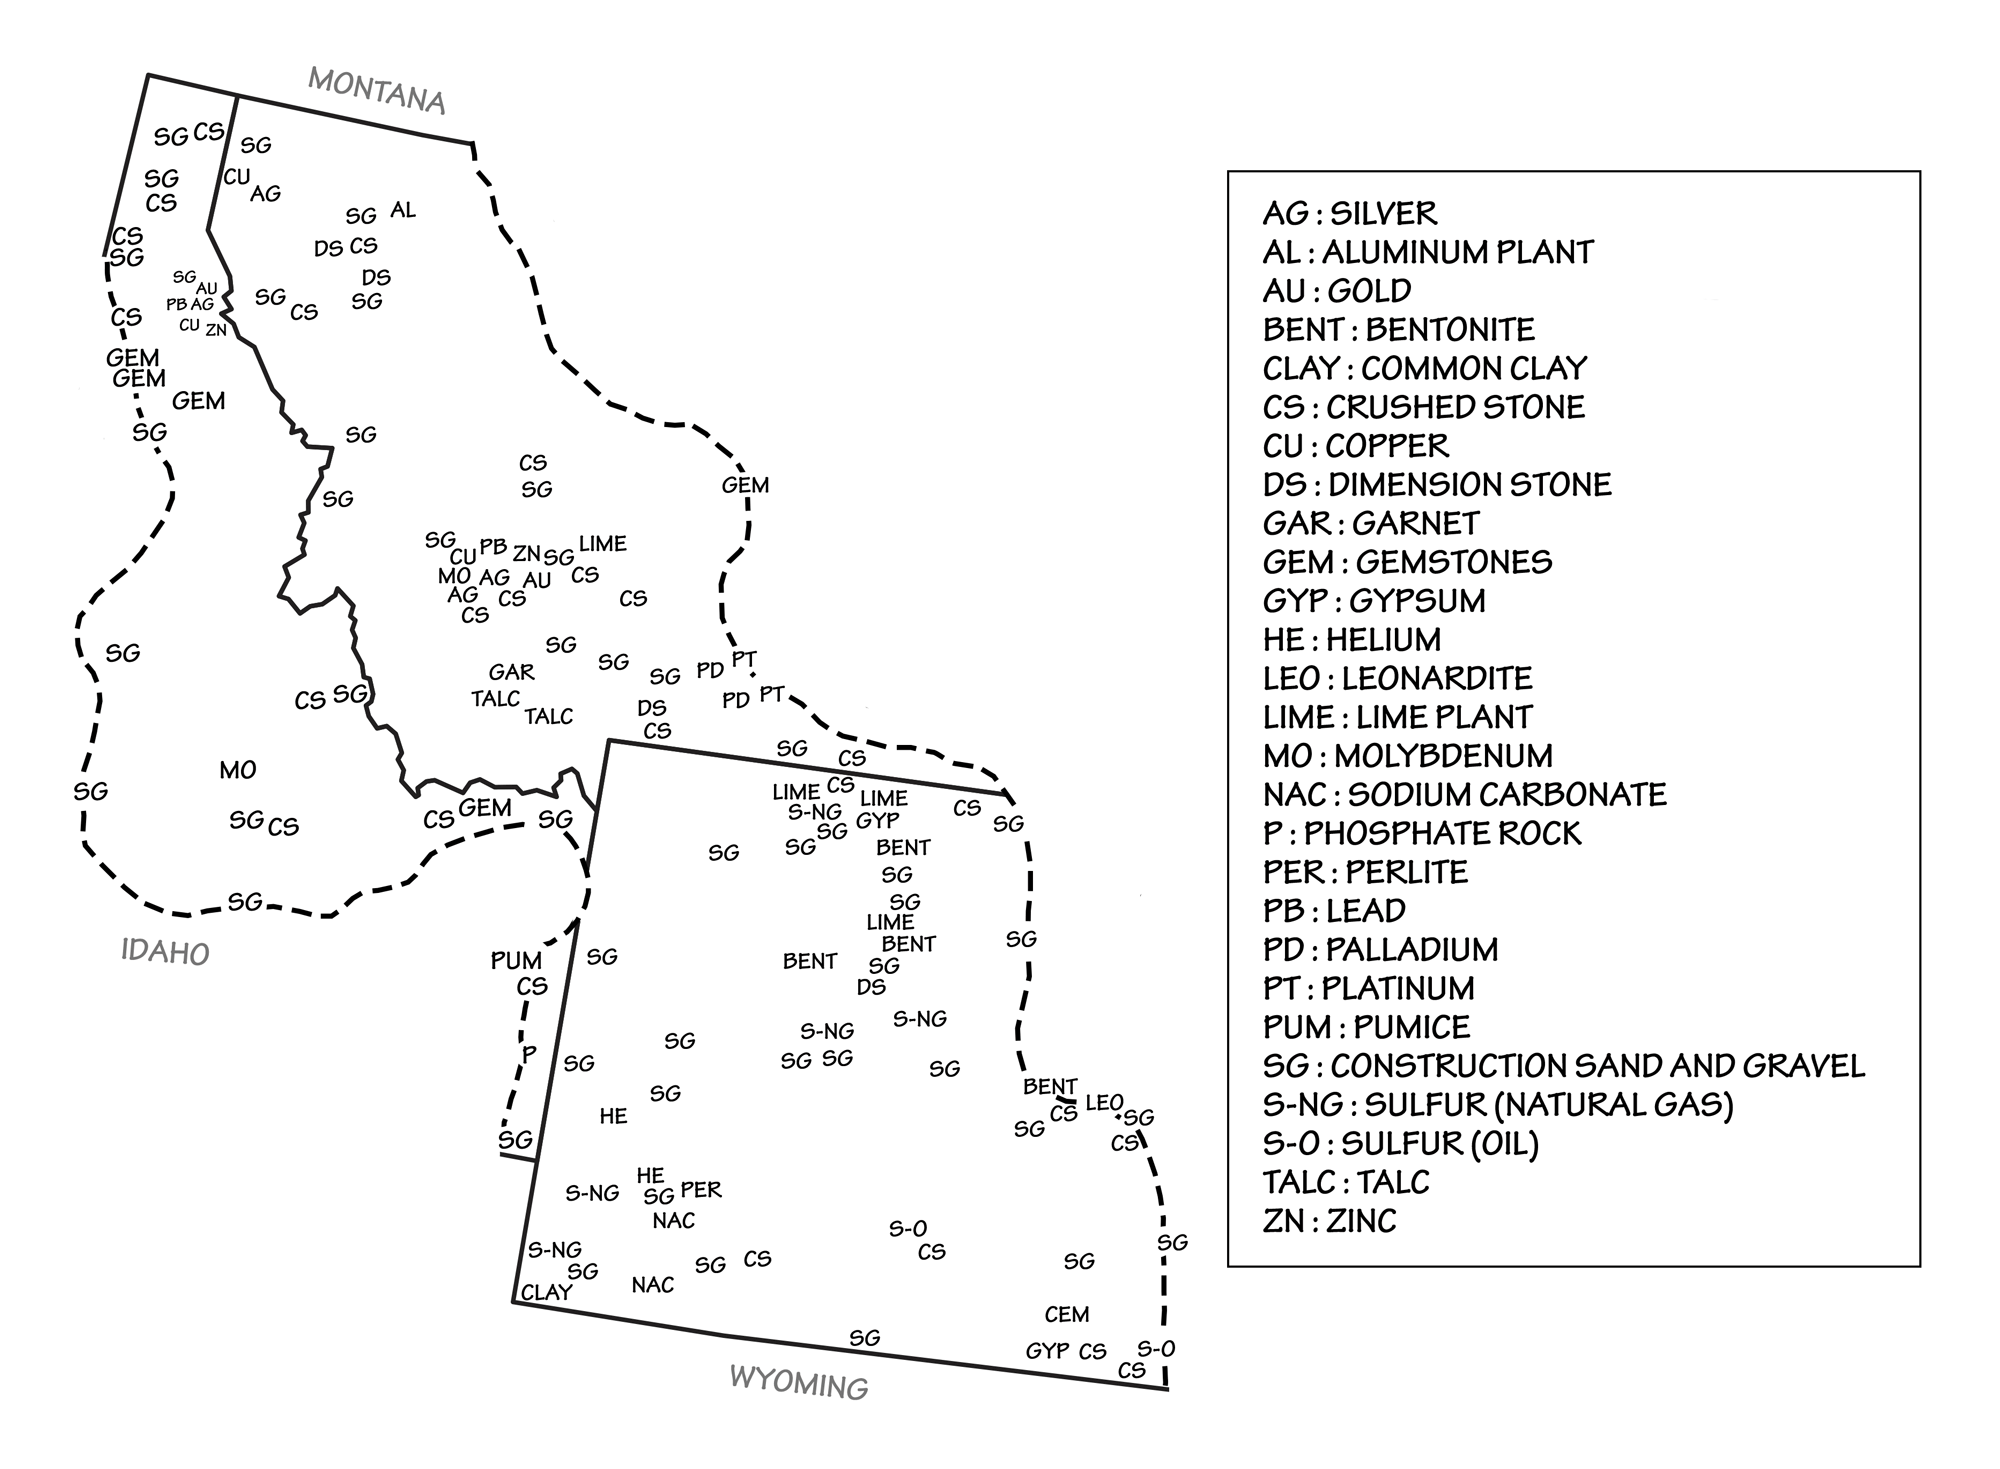 Map showing locations of different types of mineral resources in the Rocky Mountains region of the northwest central United States.